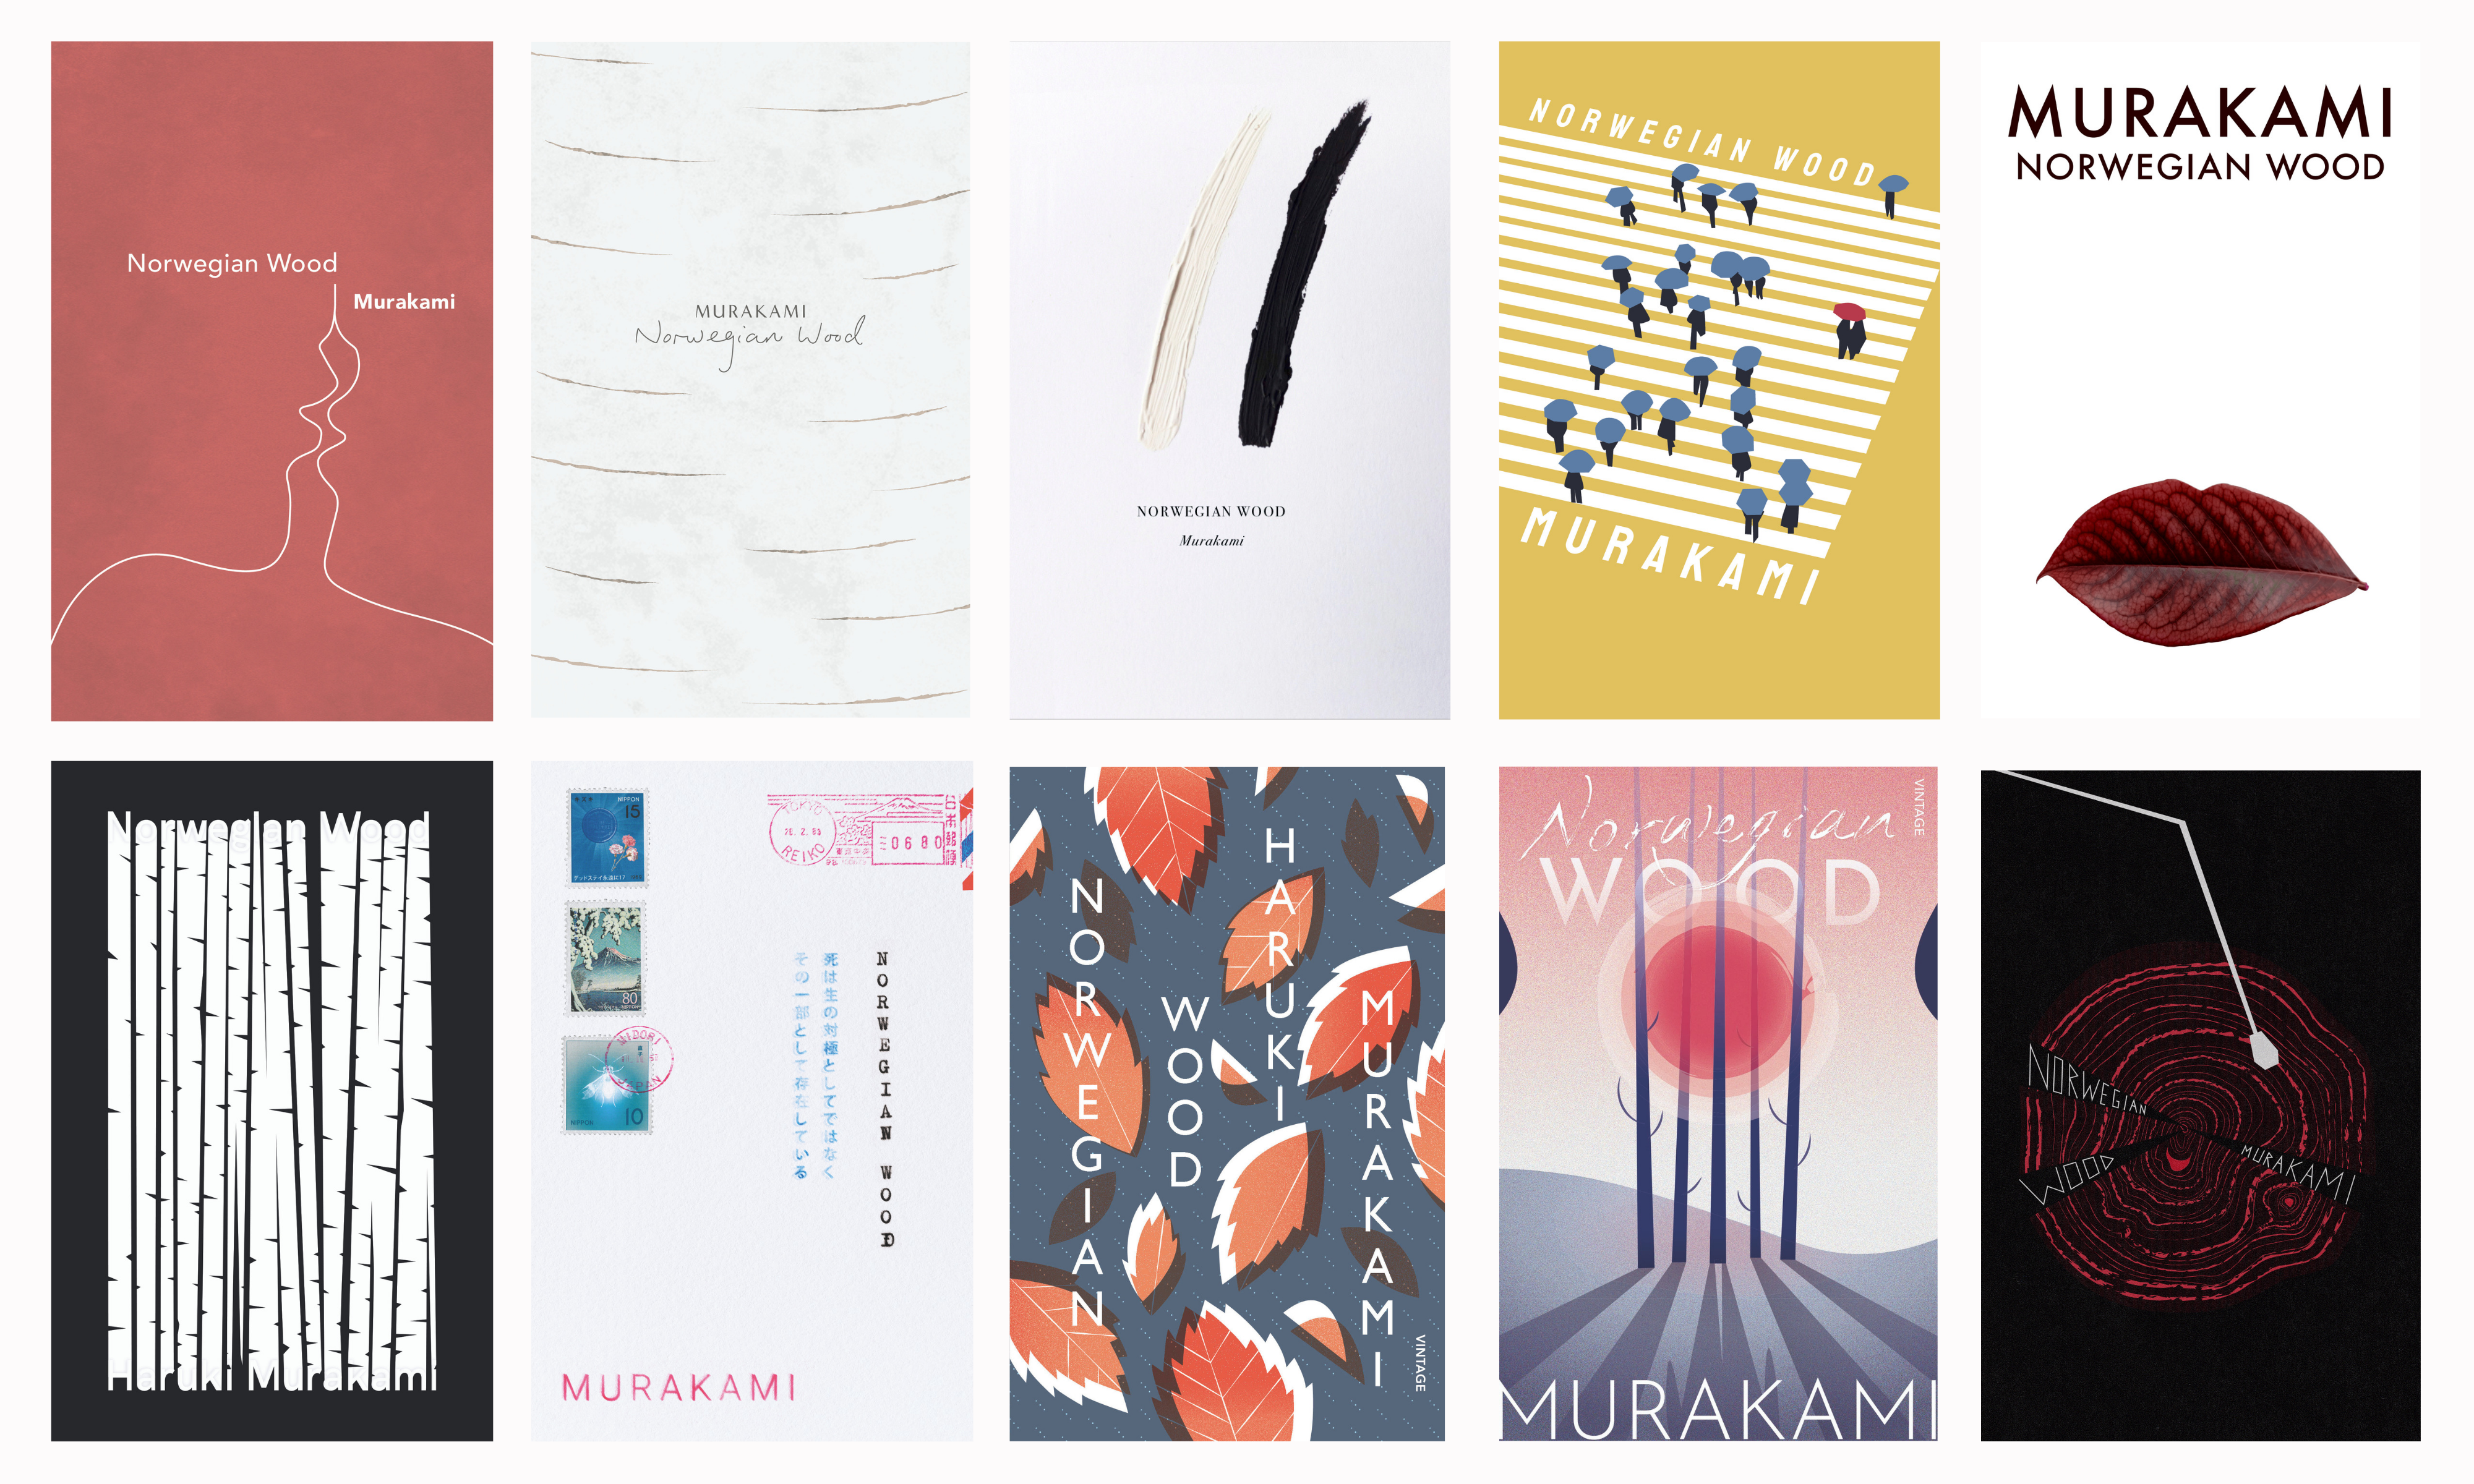 Shortlisted entries for Fiction award